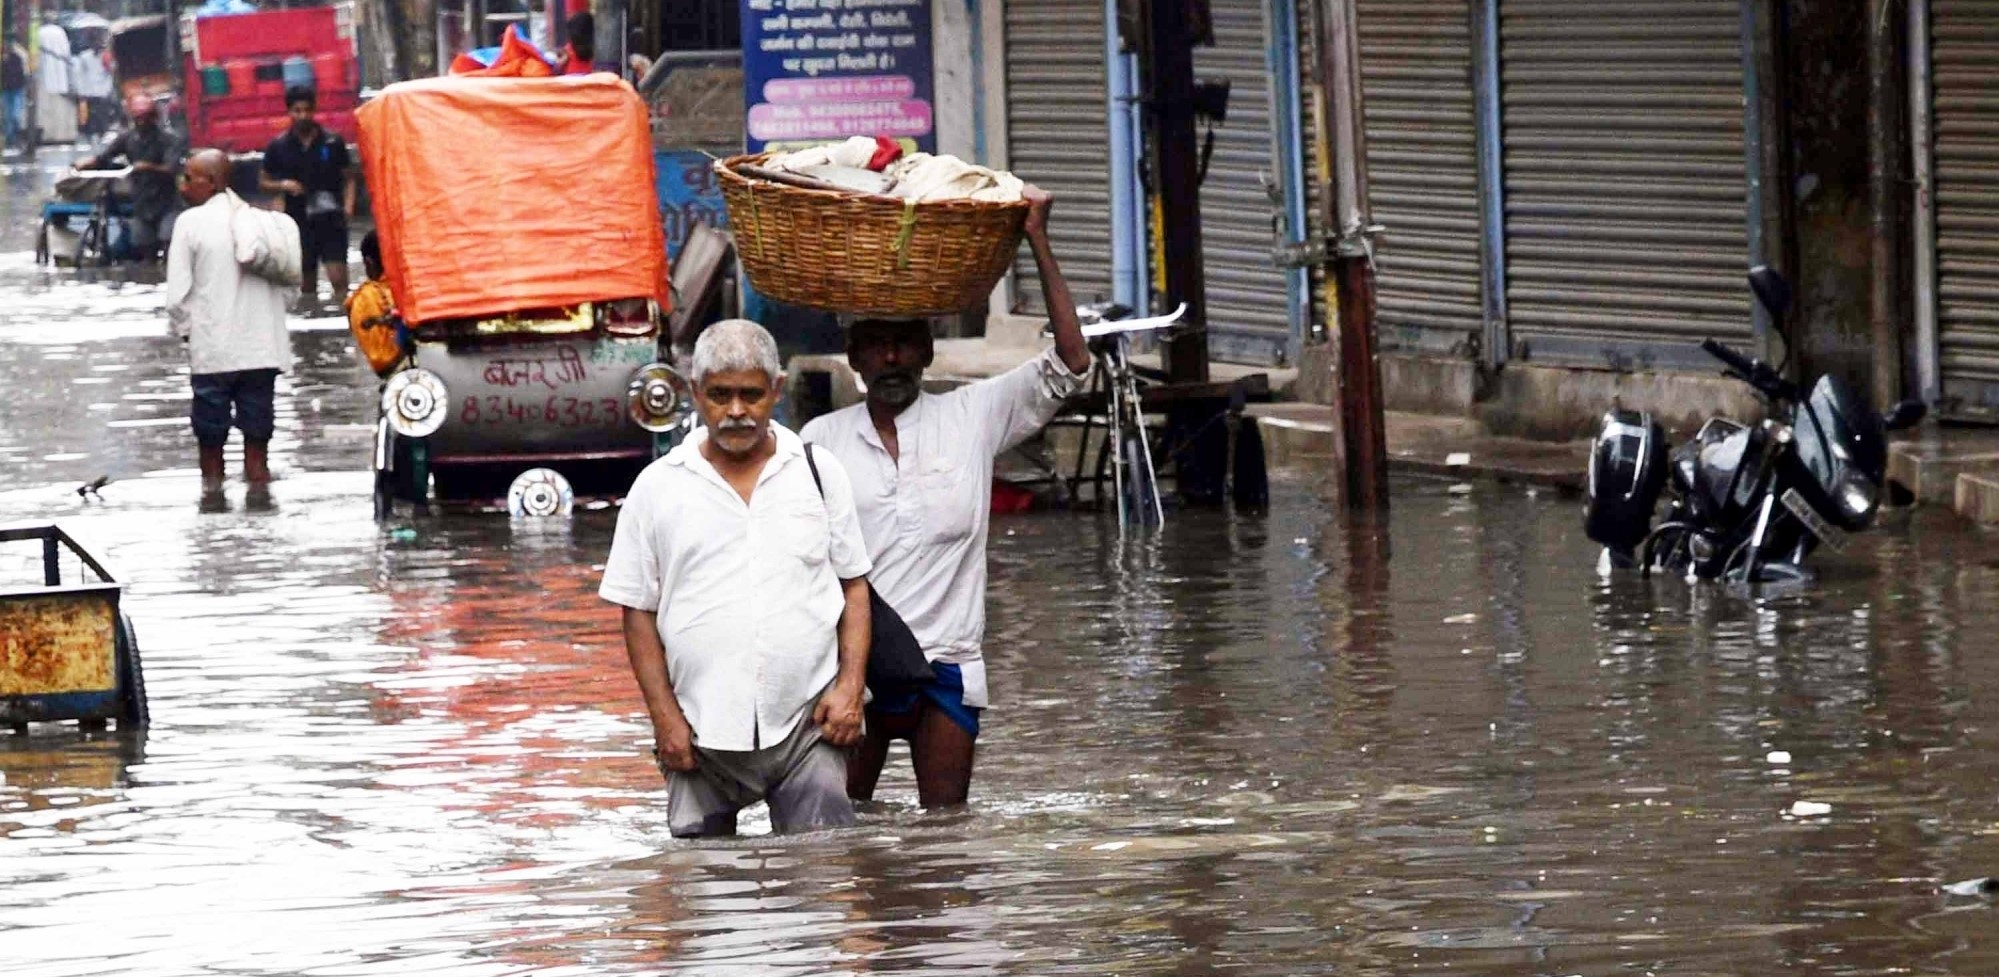 REFILE-Death toll from Indian floods reaches 147, hundreds of thousands evacuated